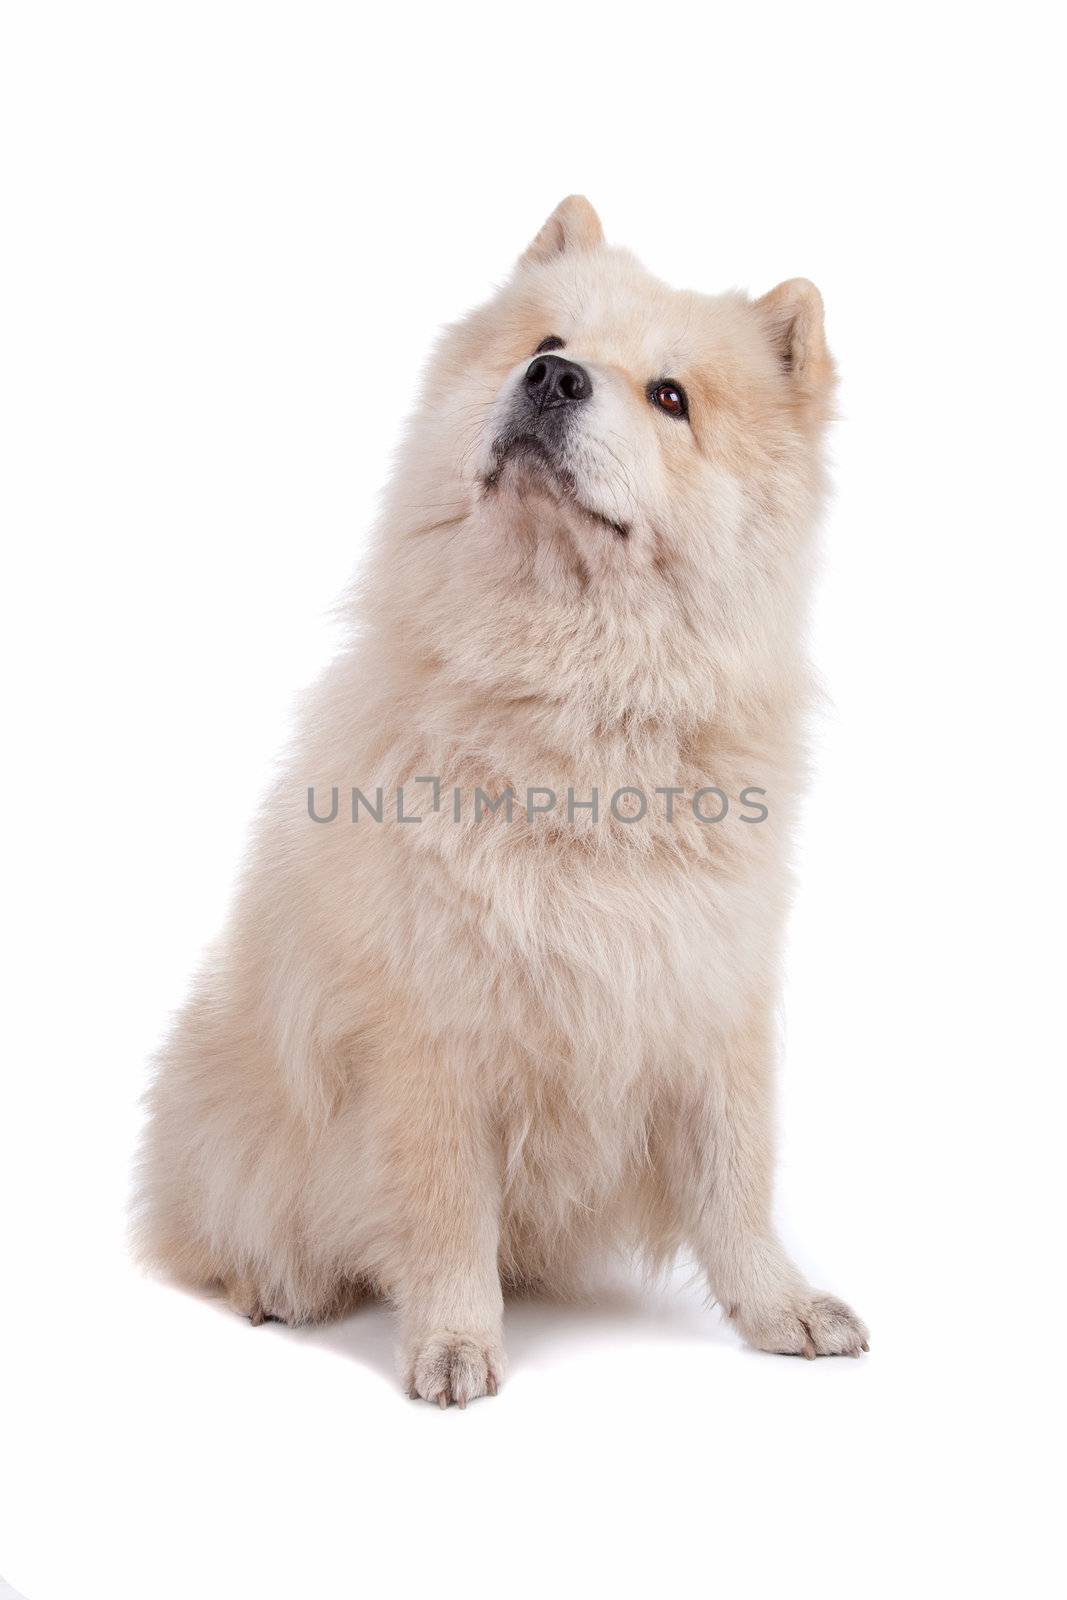 Cute mixed breed dog Chow-Chow and Samoyed sitting and looking, isolated on a white background